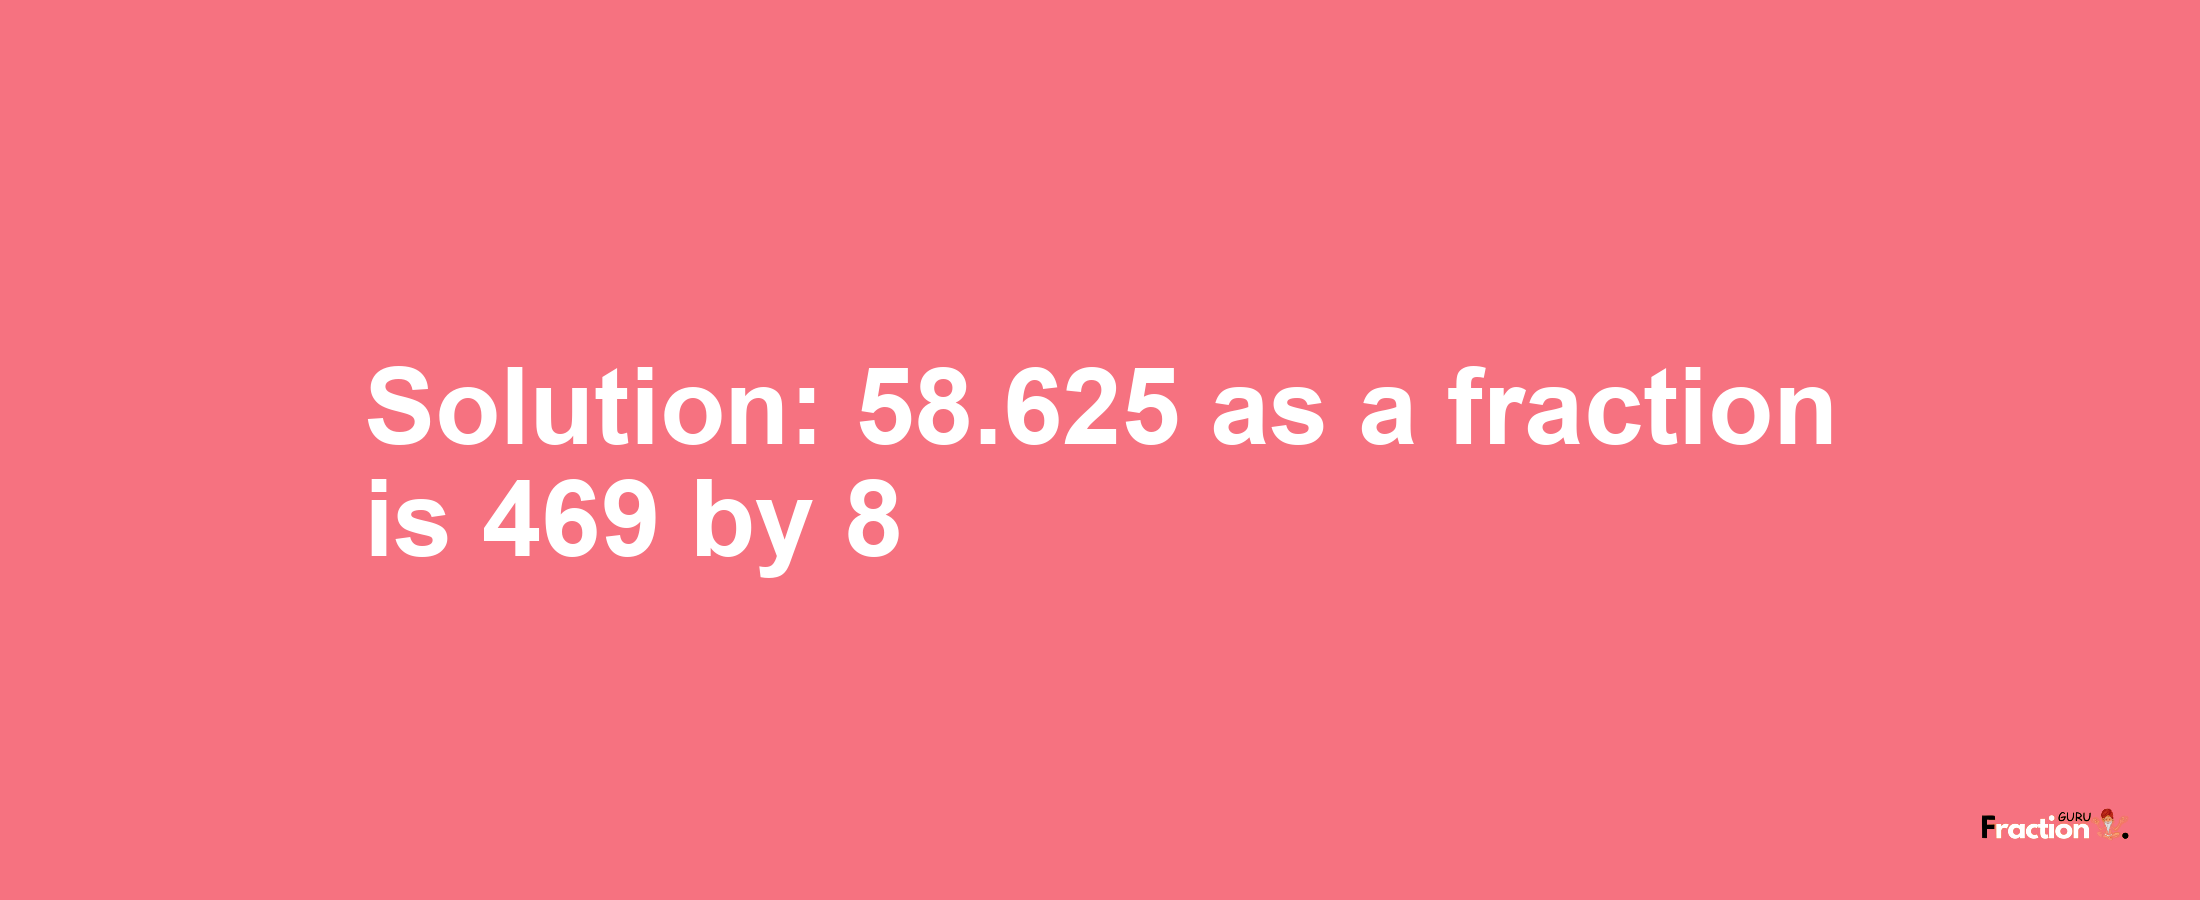 Solution:58.625 as a fraction is 469/8